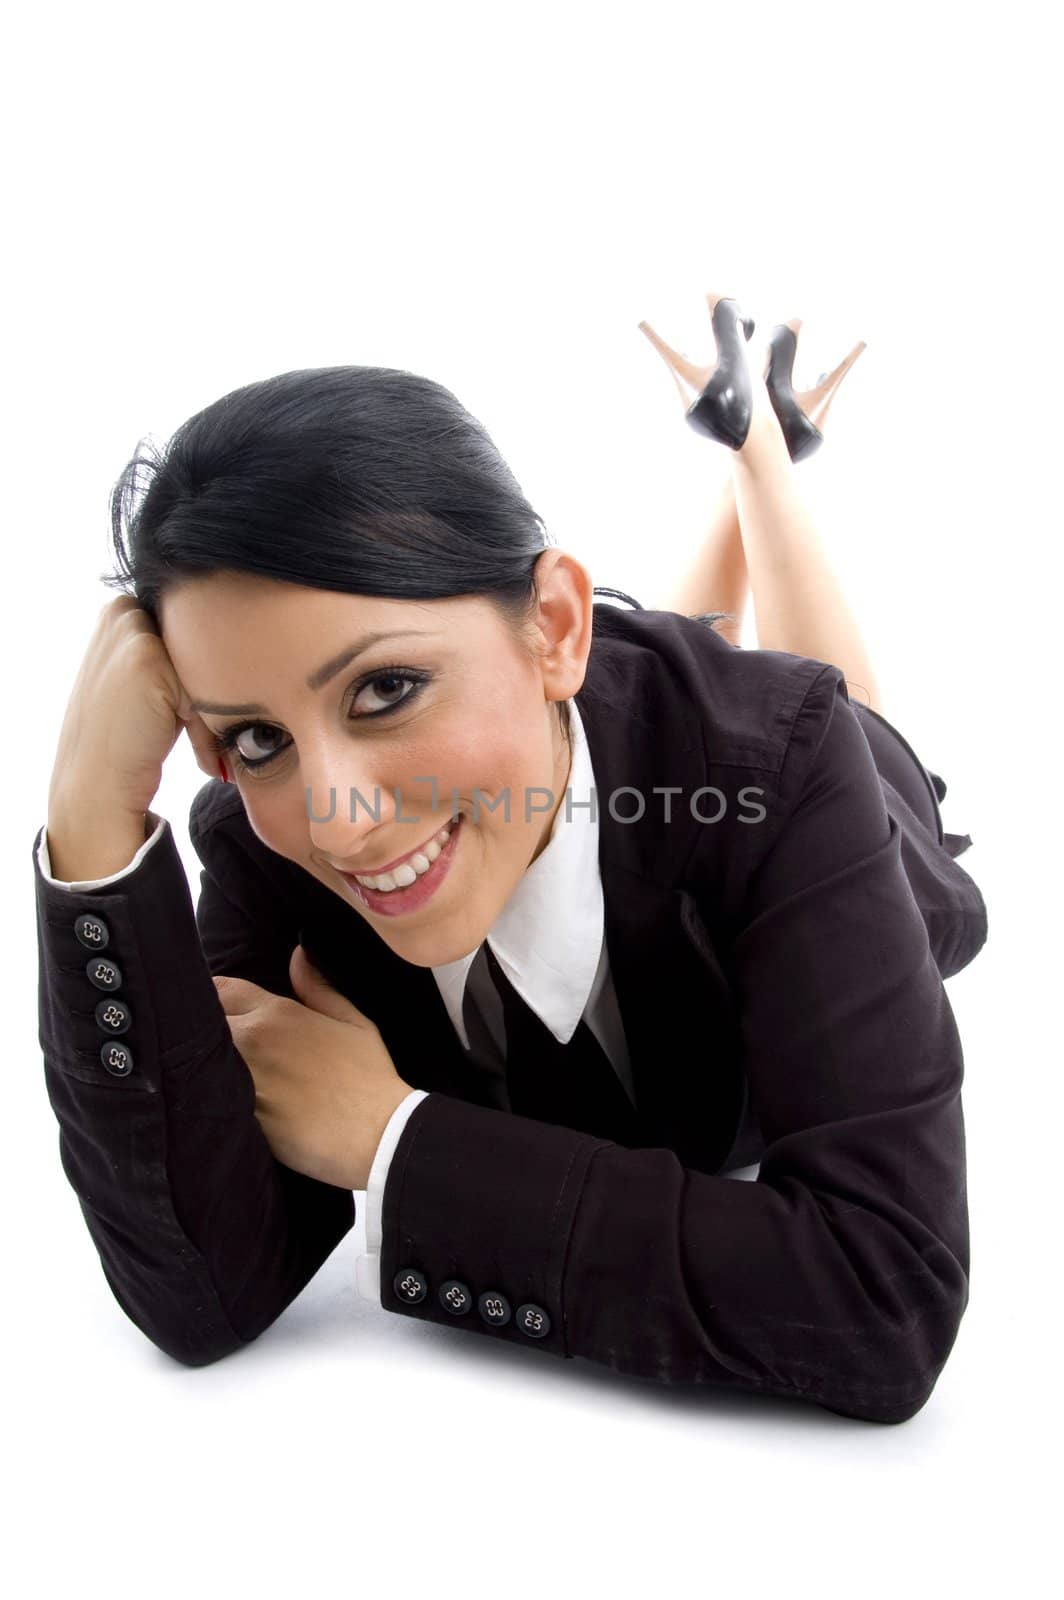 employee looking at camera against white background